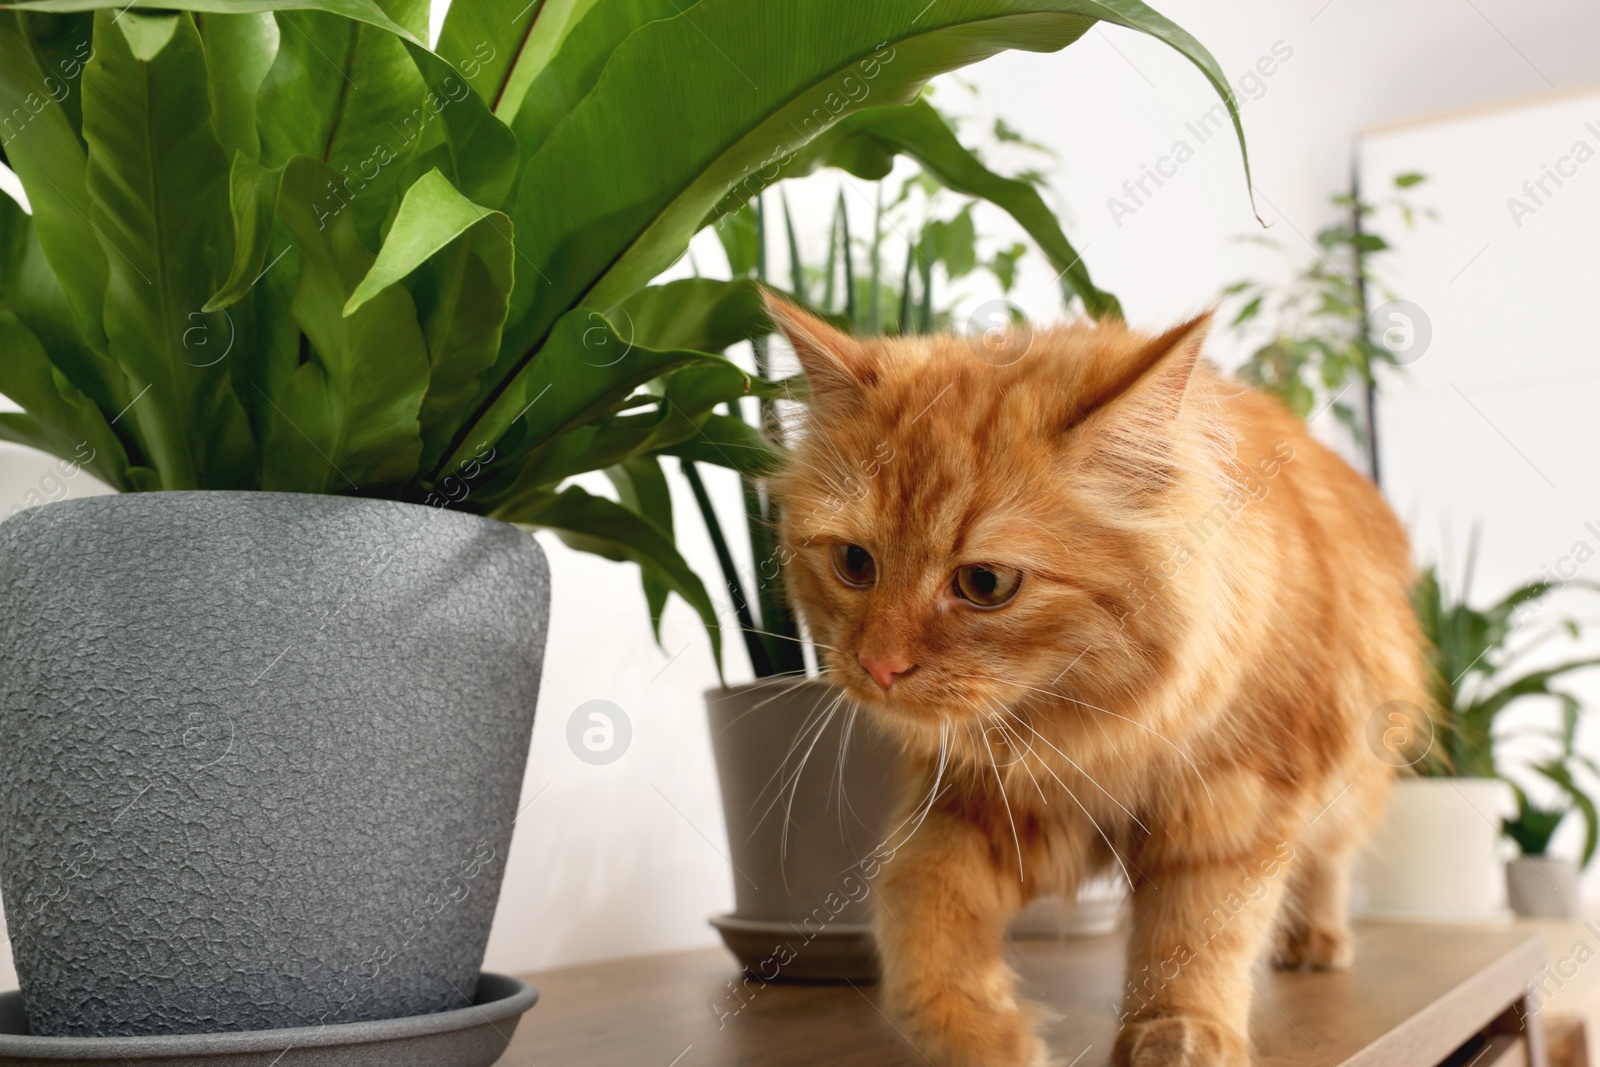 Photo of Adorable cat near green houseplants on wooden table at home